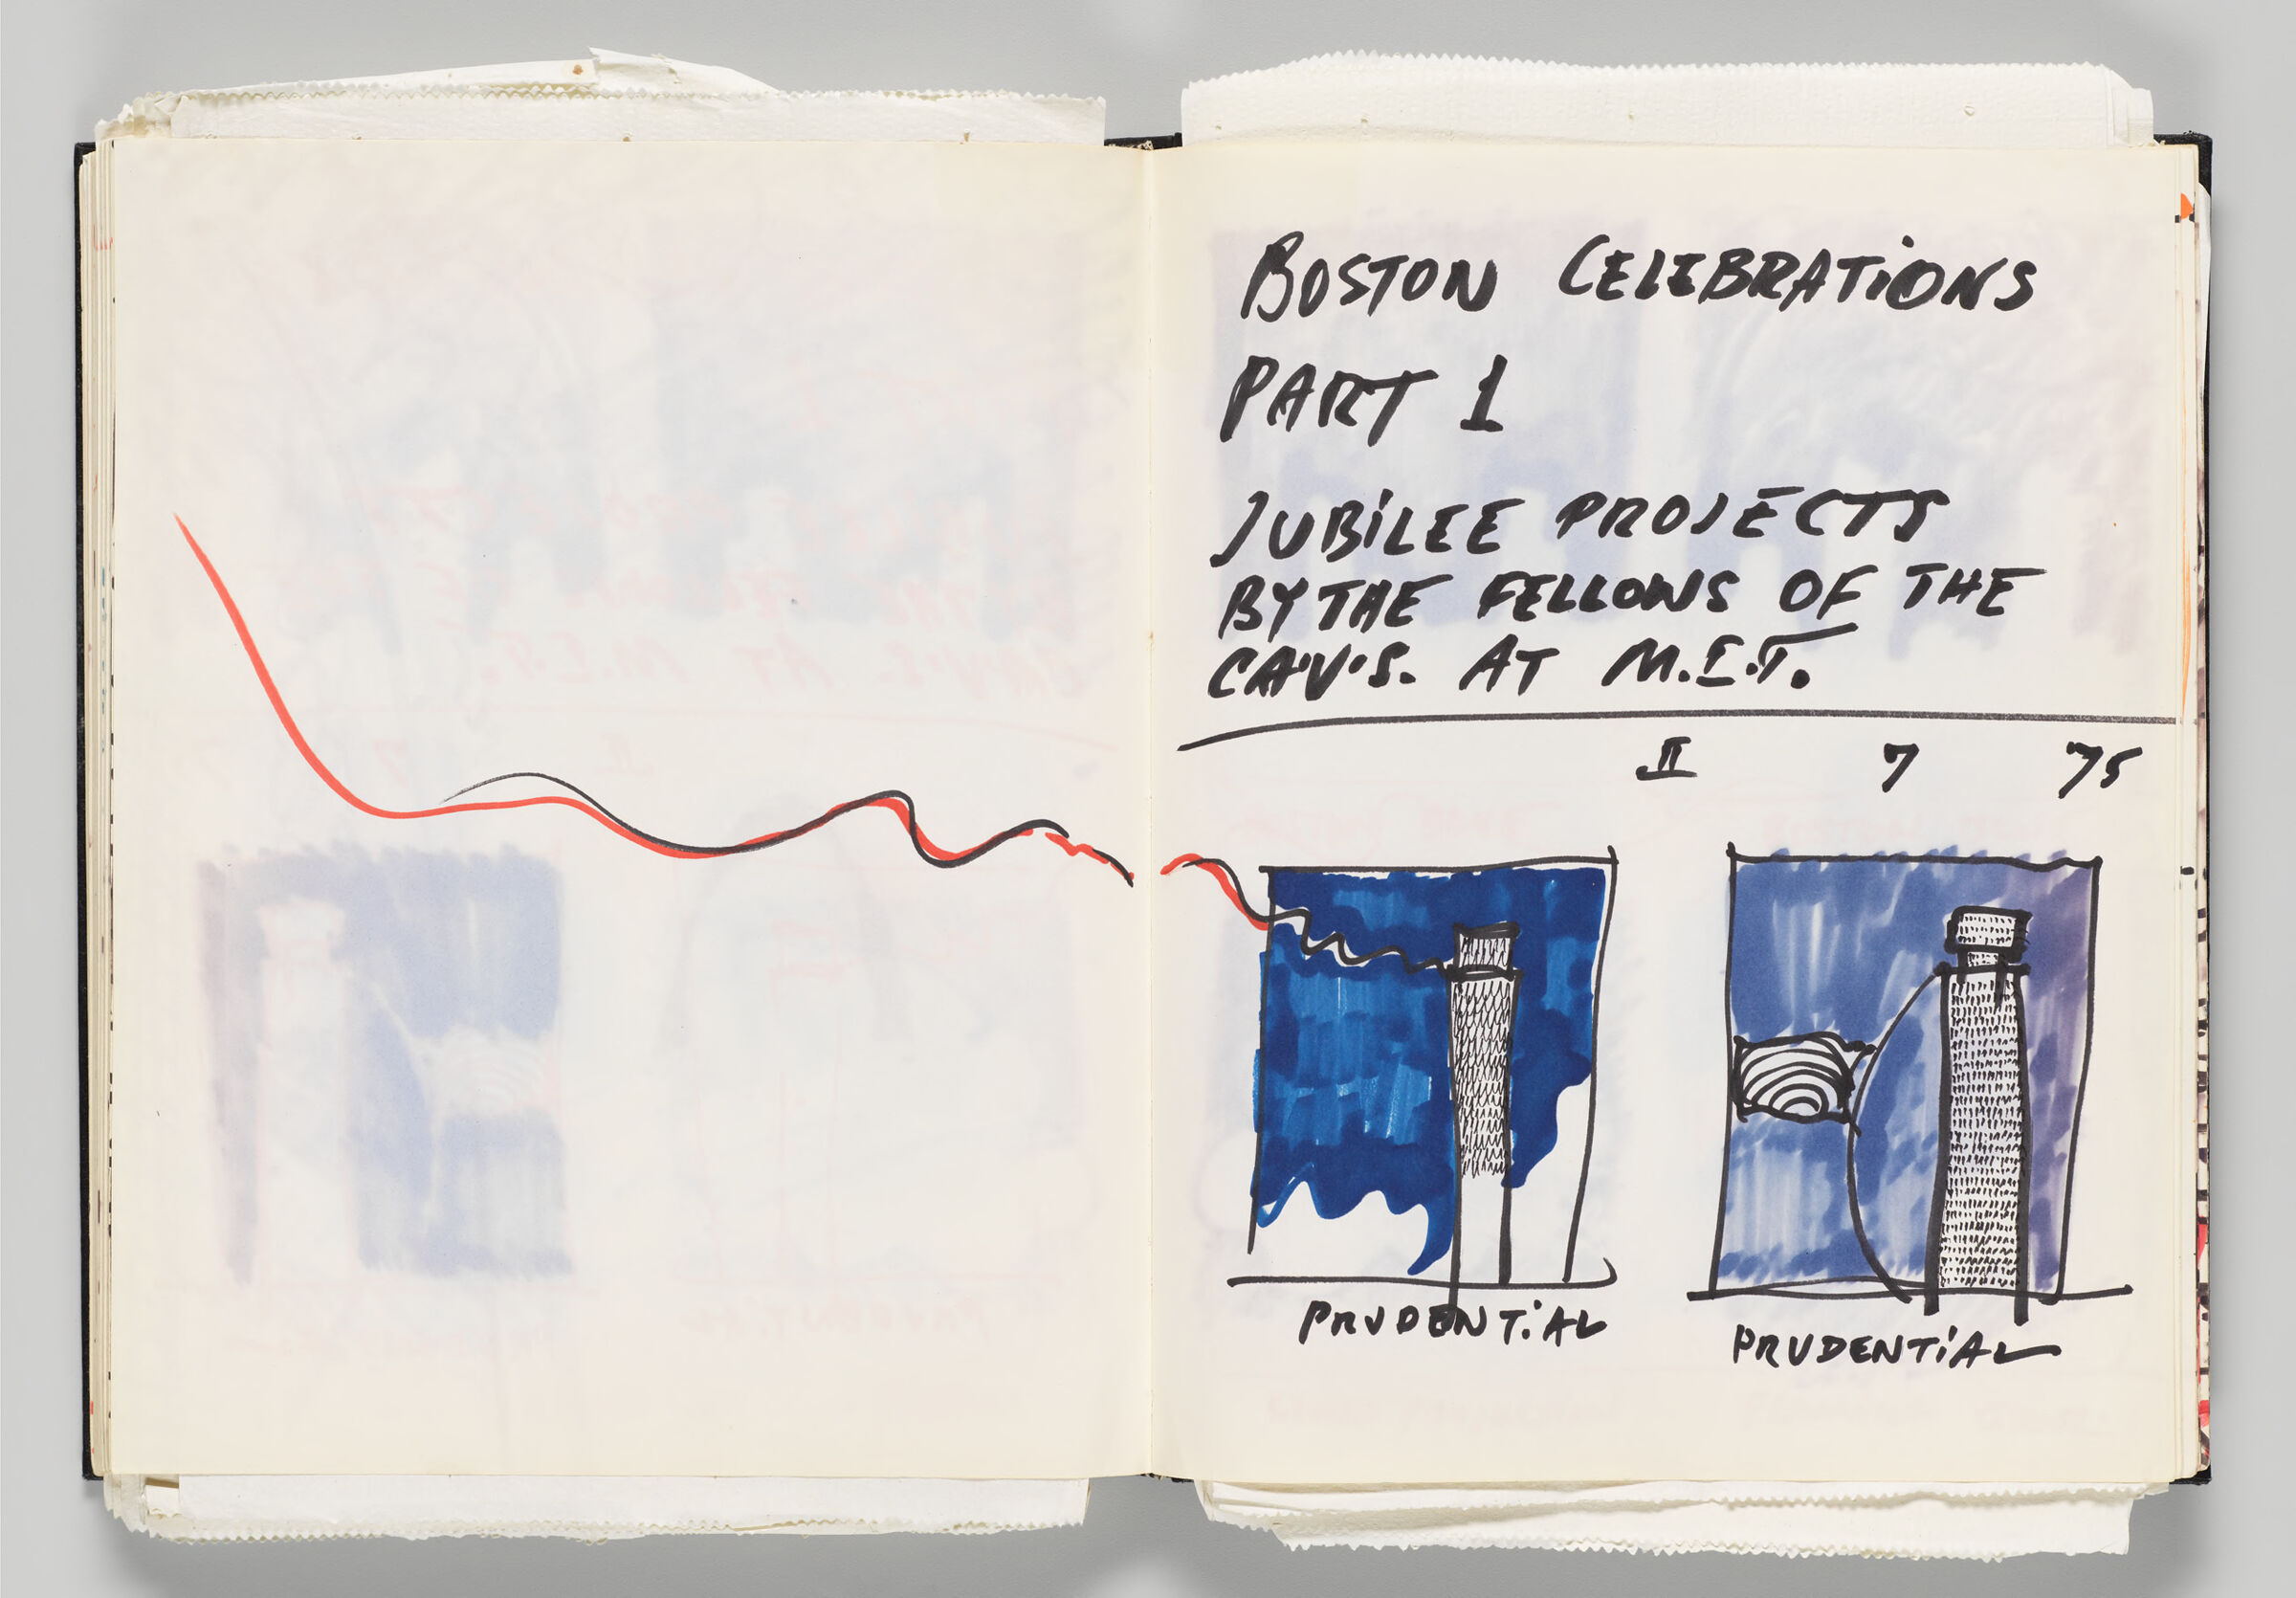 Untitled (Jubilee Project Designs For Prudential Building With Color Transfers, Two-Page Spread)